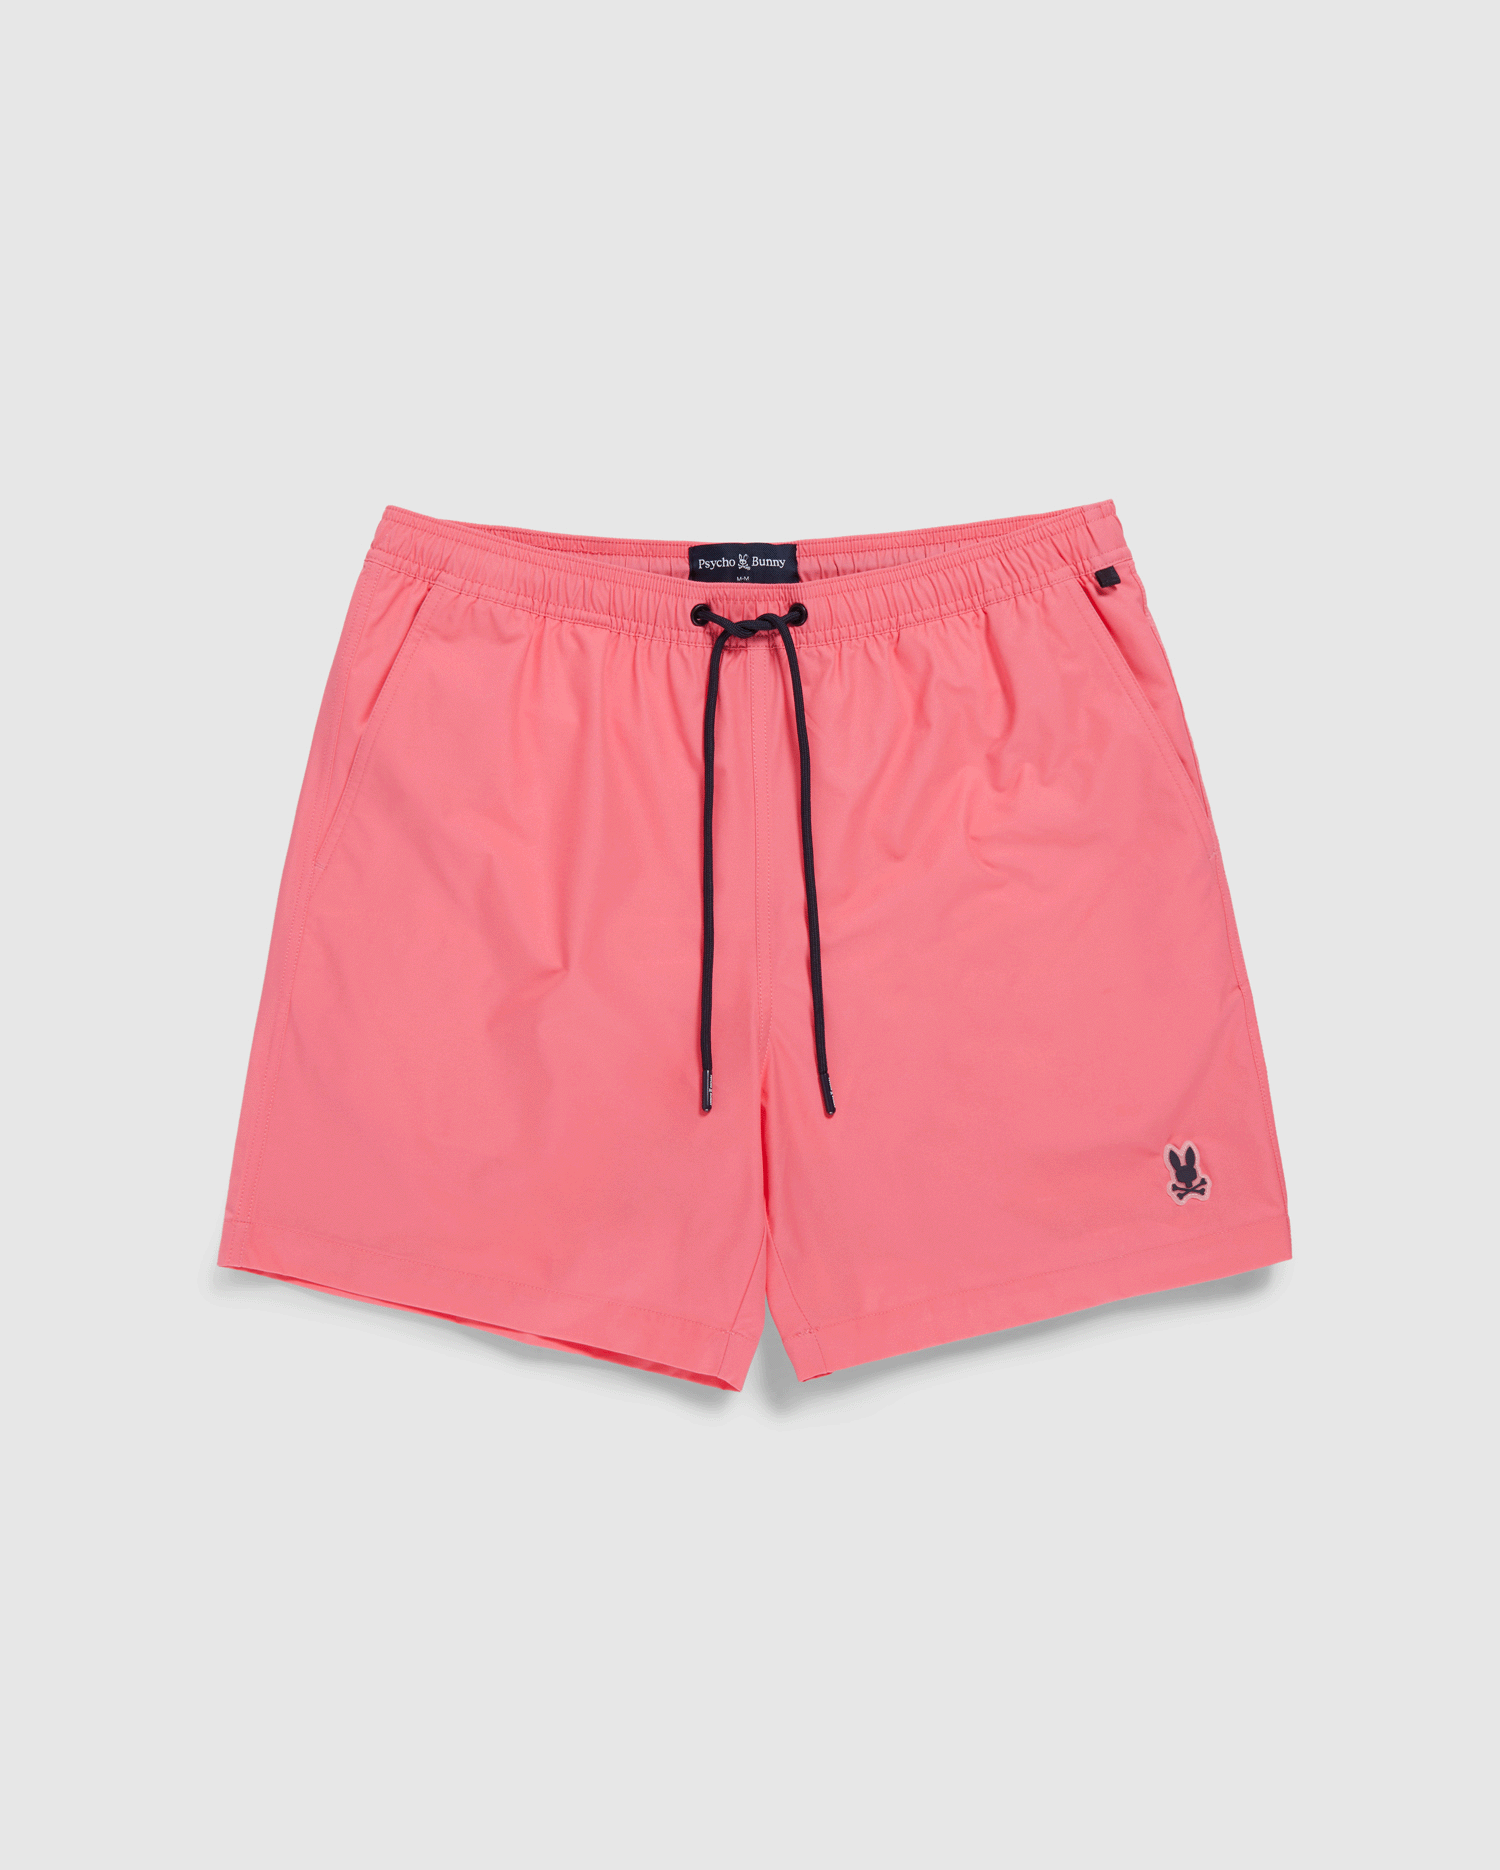 Bright pink Psycho Bunny MENS MALTA HYDROCHROMIC SWIM TRUNK with a black drawstring and a small dark logo on the lower left leg, displayed on a plain white background.